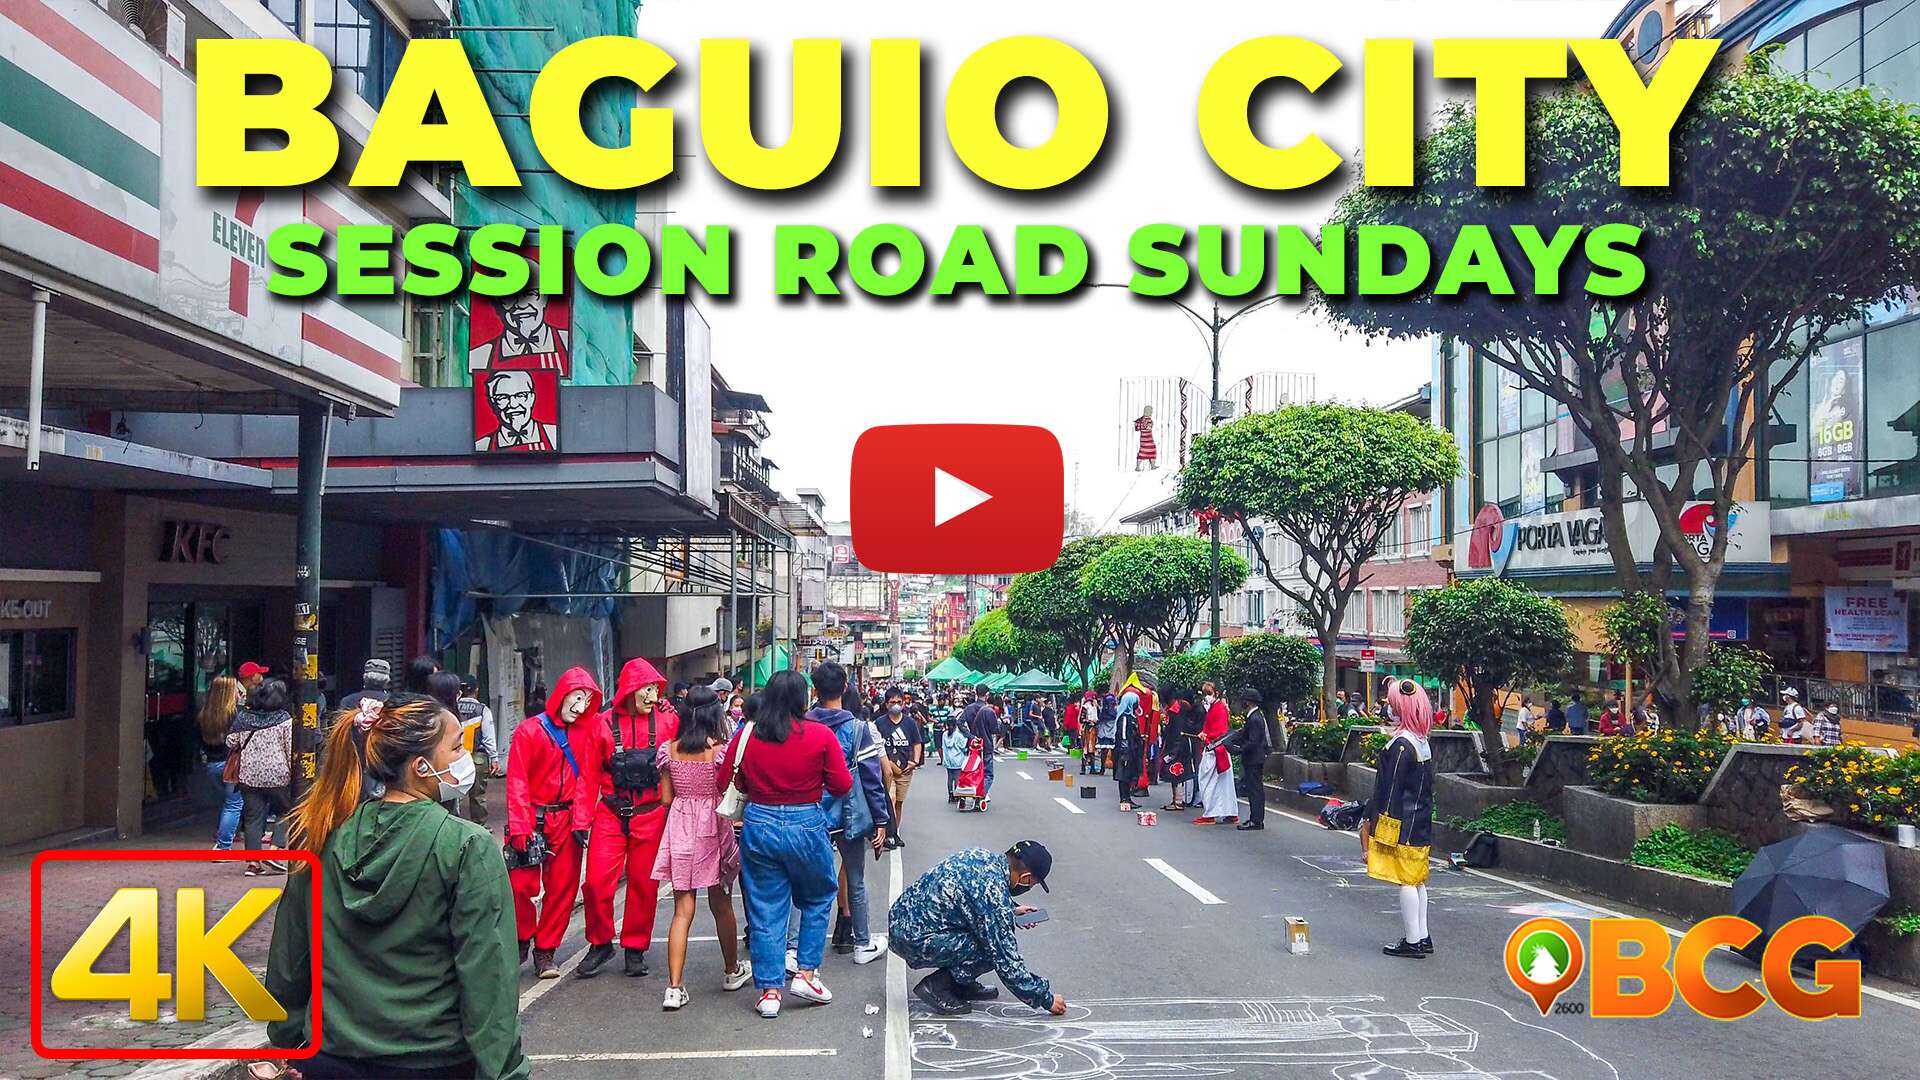 Baguio City Session Road Sunday Walking Tour With Play 1920x1080 